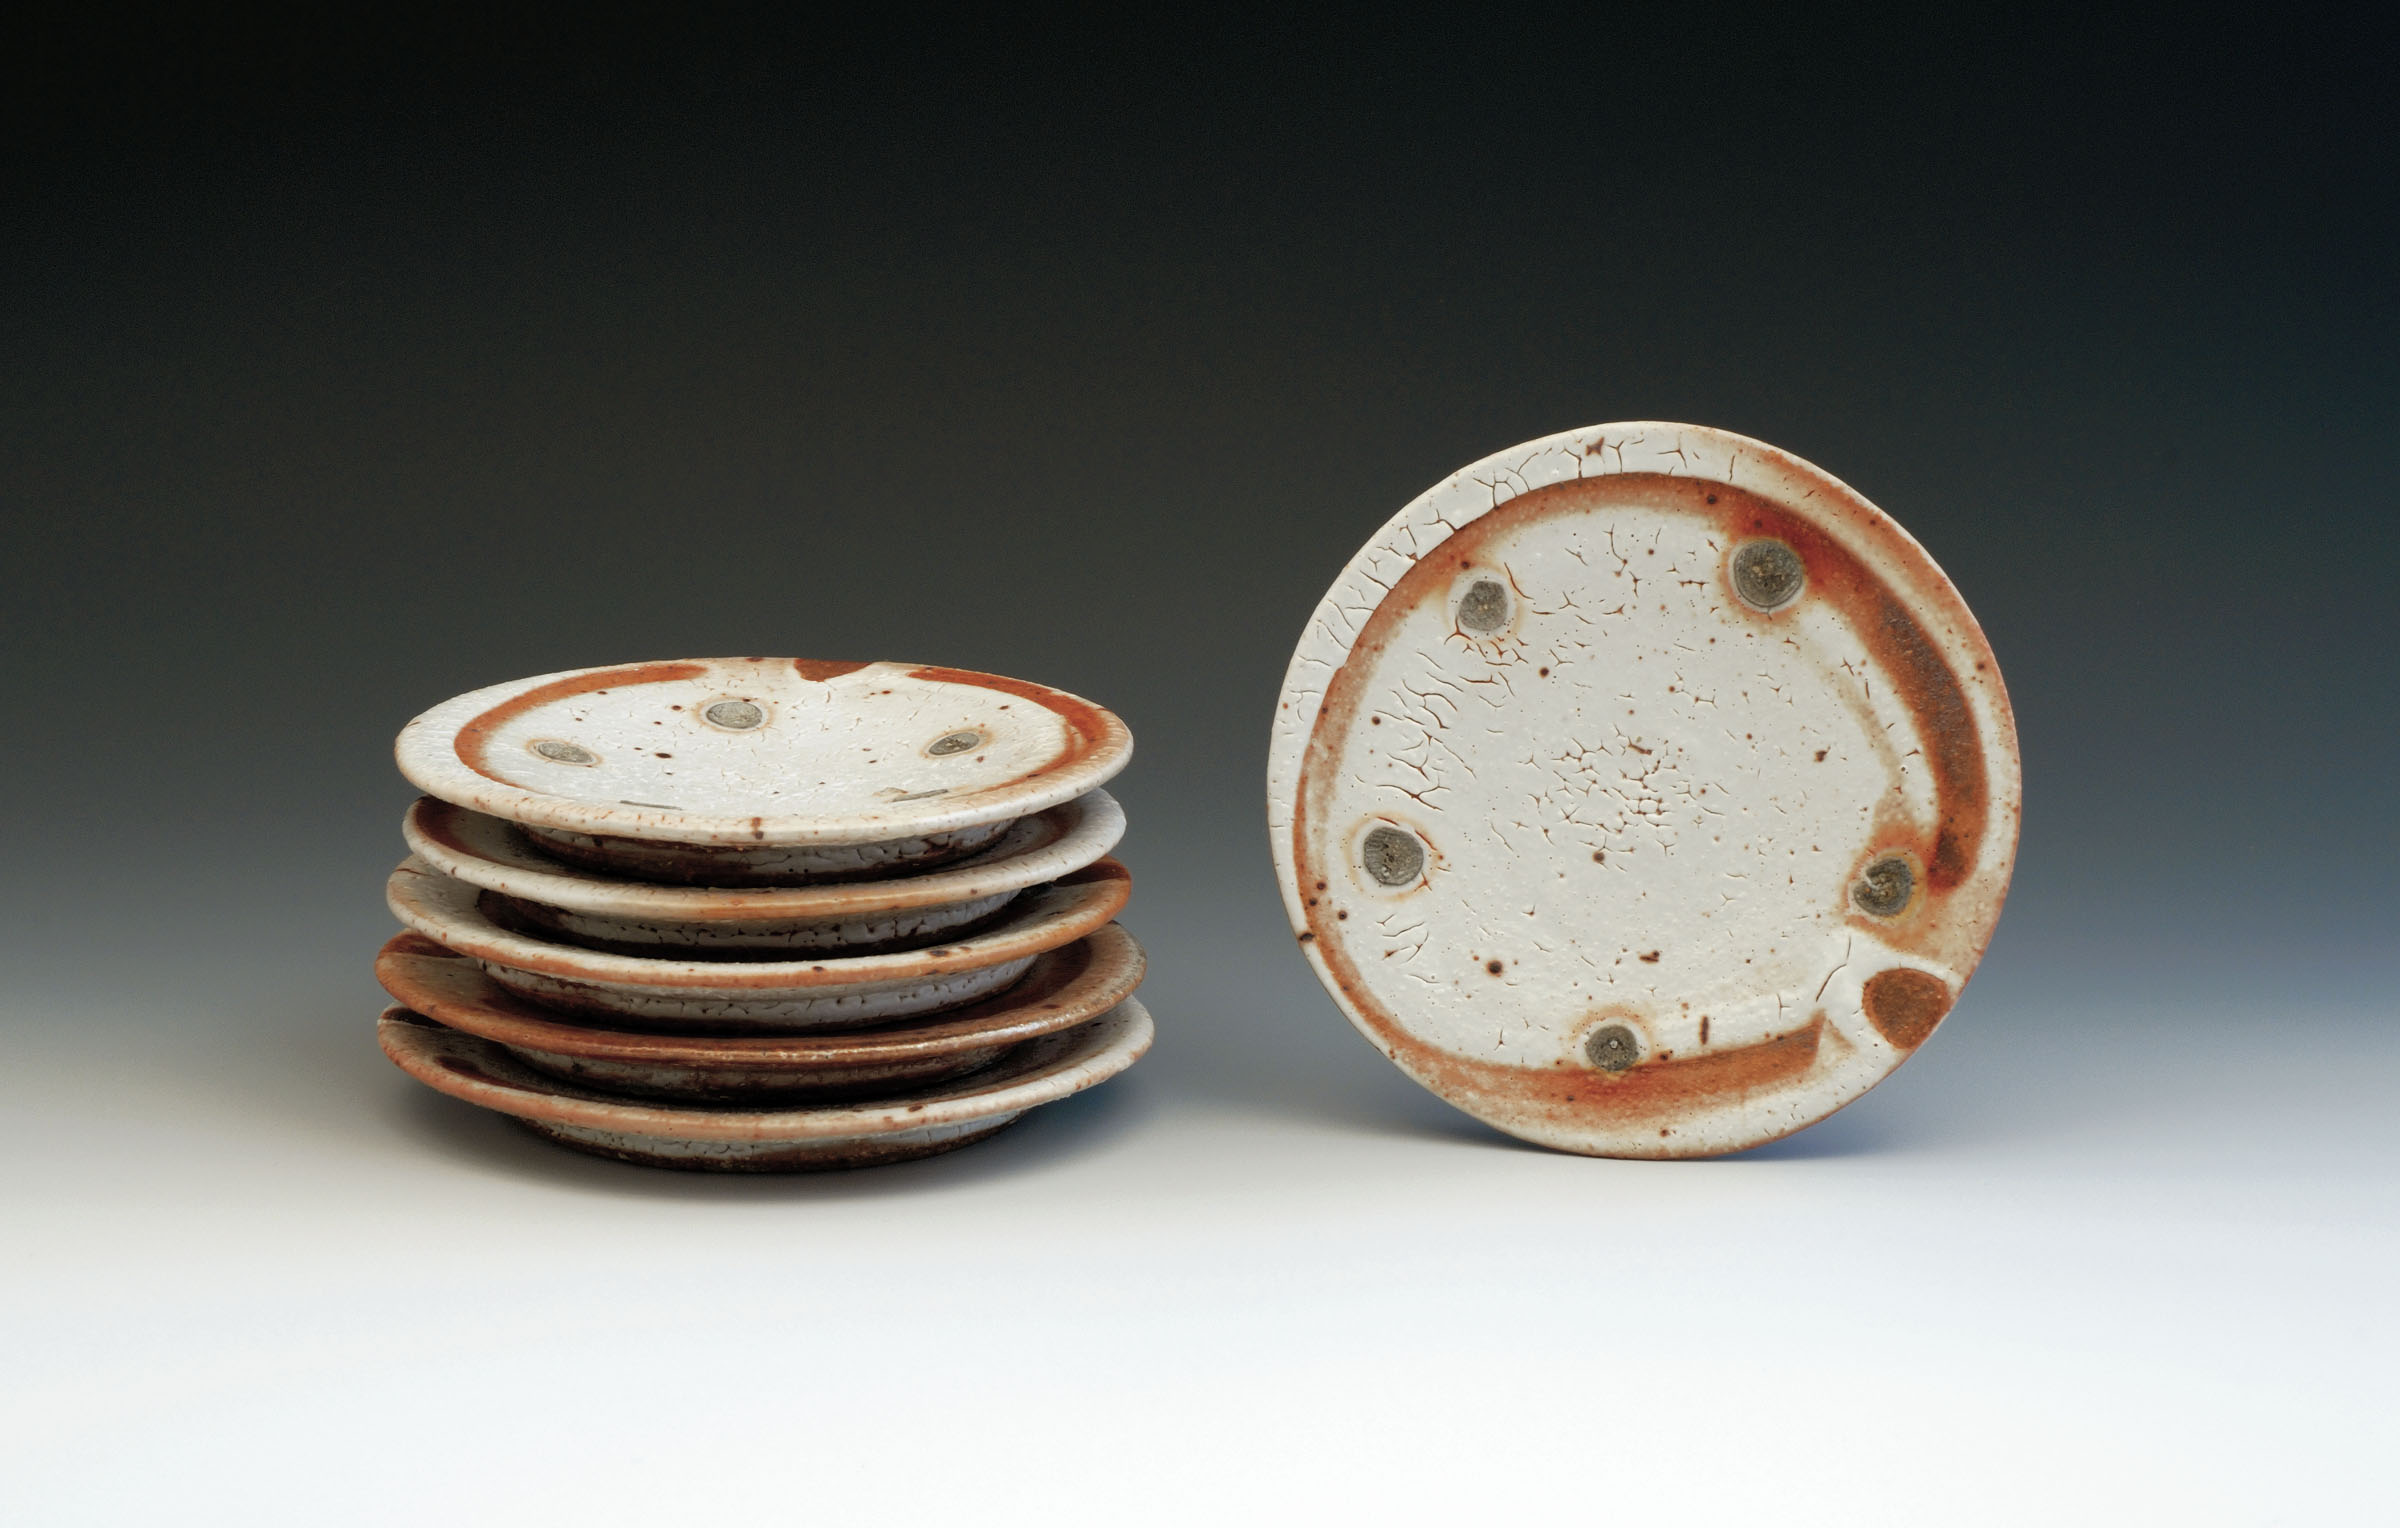 Set of plates, 7 in. (18 cm) in diameter, thrown stoneware with Shino glaze, fired in a stack to Cone 12, by Lisa Hammond, London, England.